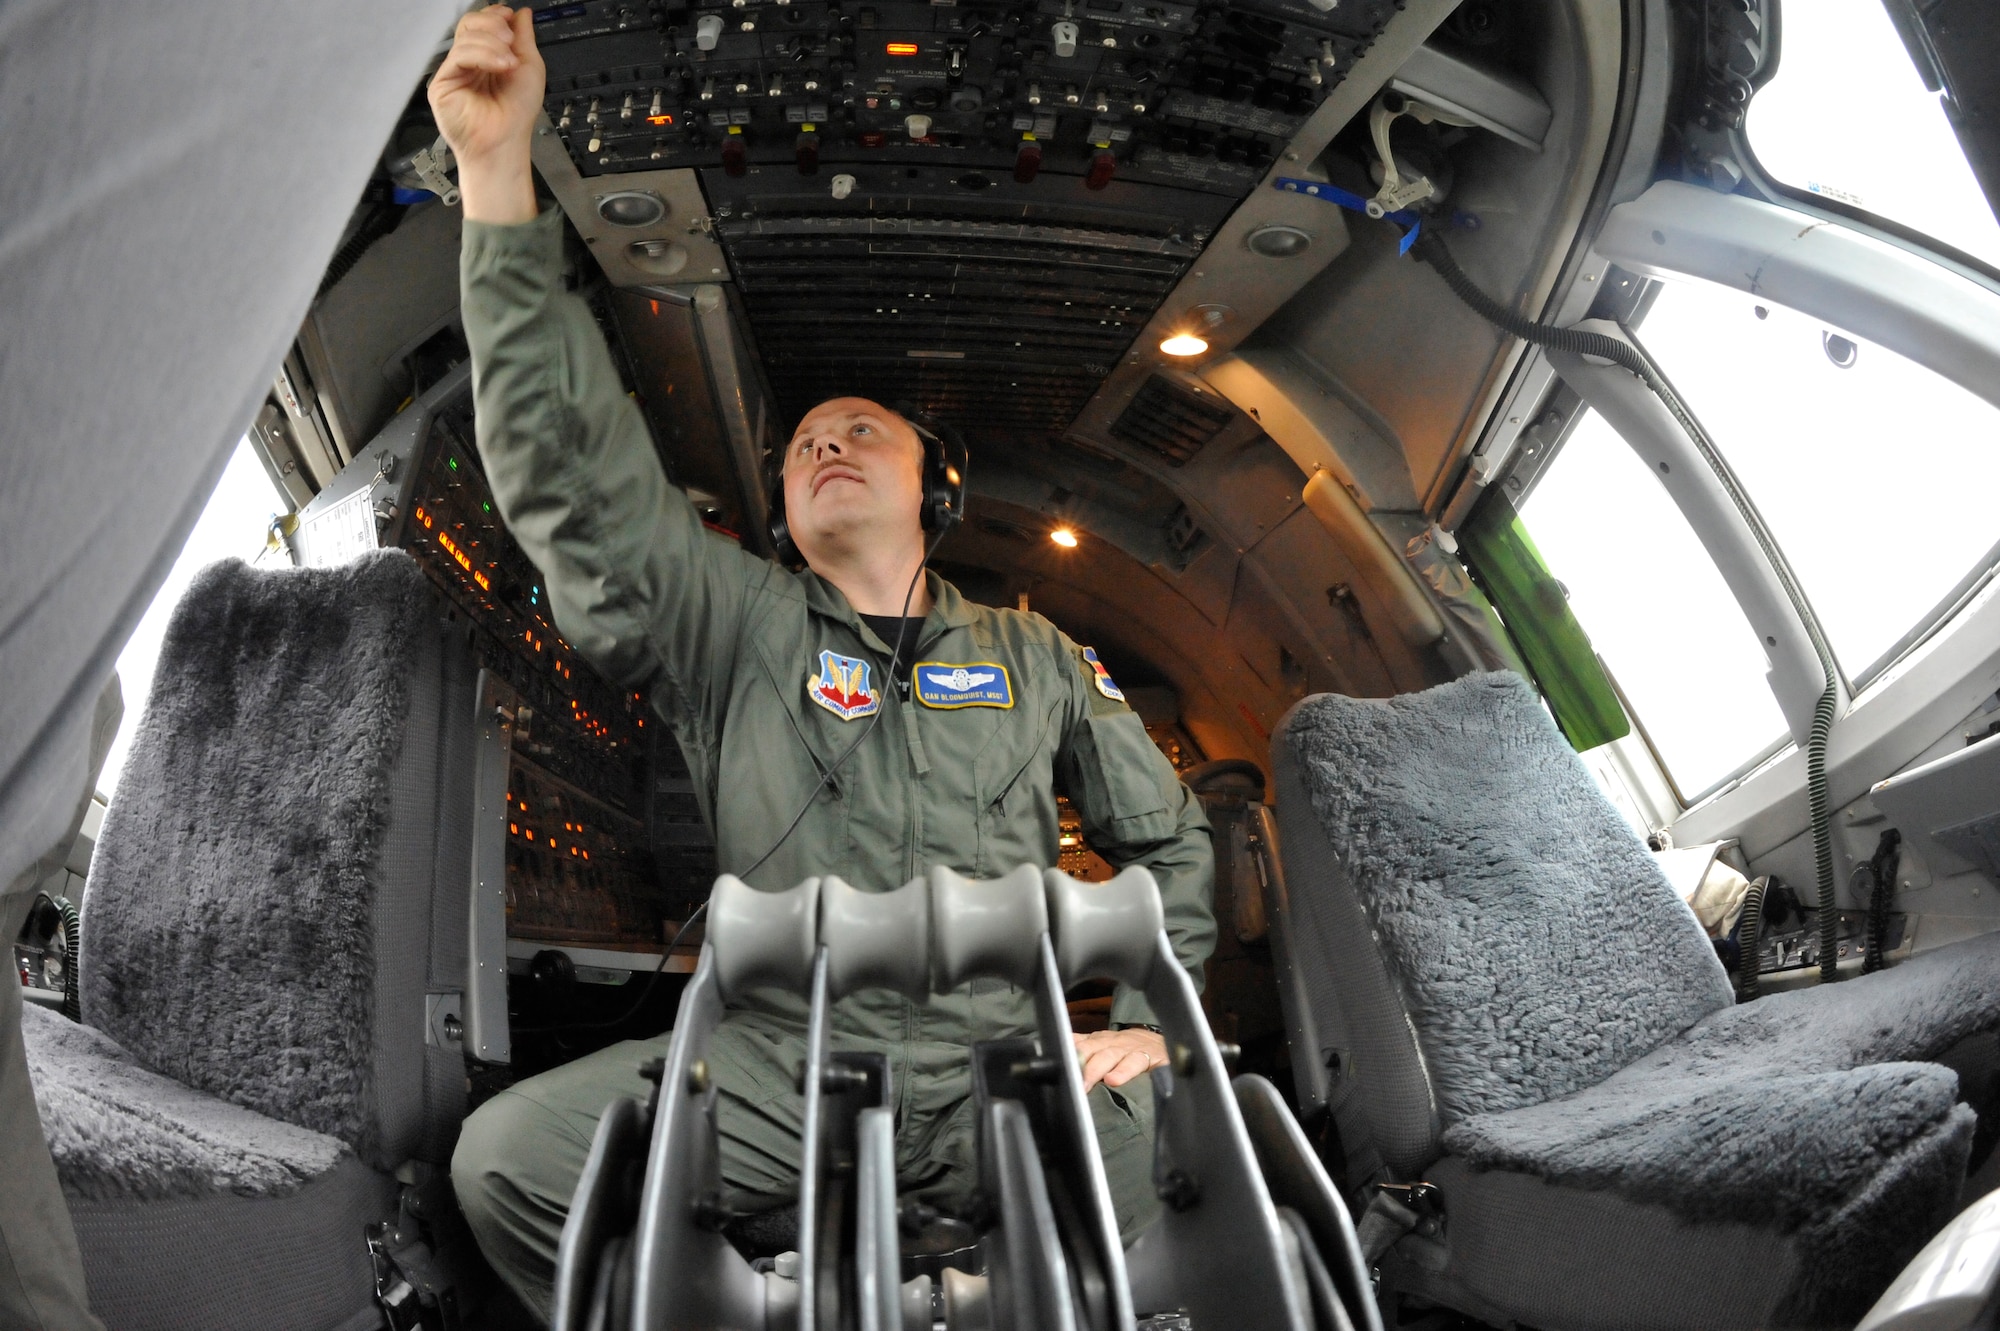 Master Sgt. Dan Bloomquist, a flight engineer with the 1st Airborne Command and Control Squadron at Offutt Air Force Base, Neb., preps an E-4B for flight during a simulated alert mission. The E-4B serves as the National Airborne Operations Center for the president, secretary of defense and chairman of the Joint Chiefs of Staff. The aircraft passed a significant milestone this month by sitting alert constantly for more than 35 years. (U.S. Air Force photo/Lance Cheung)